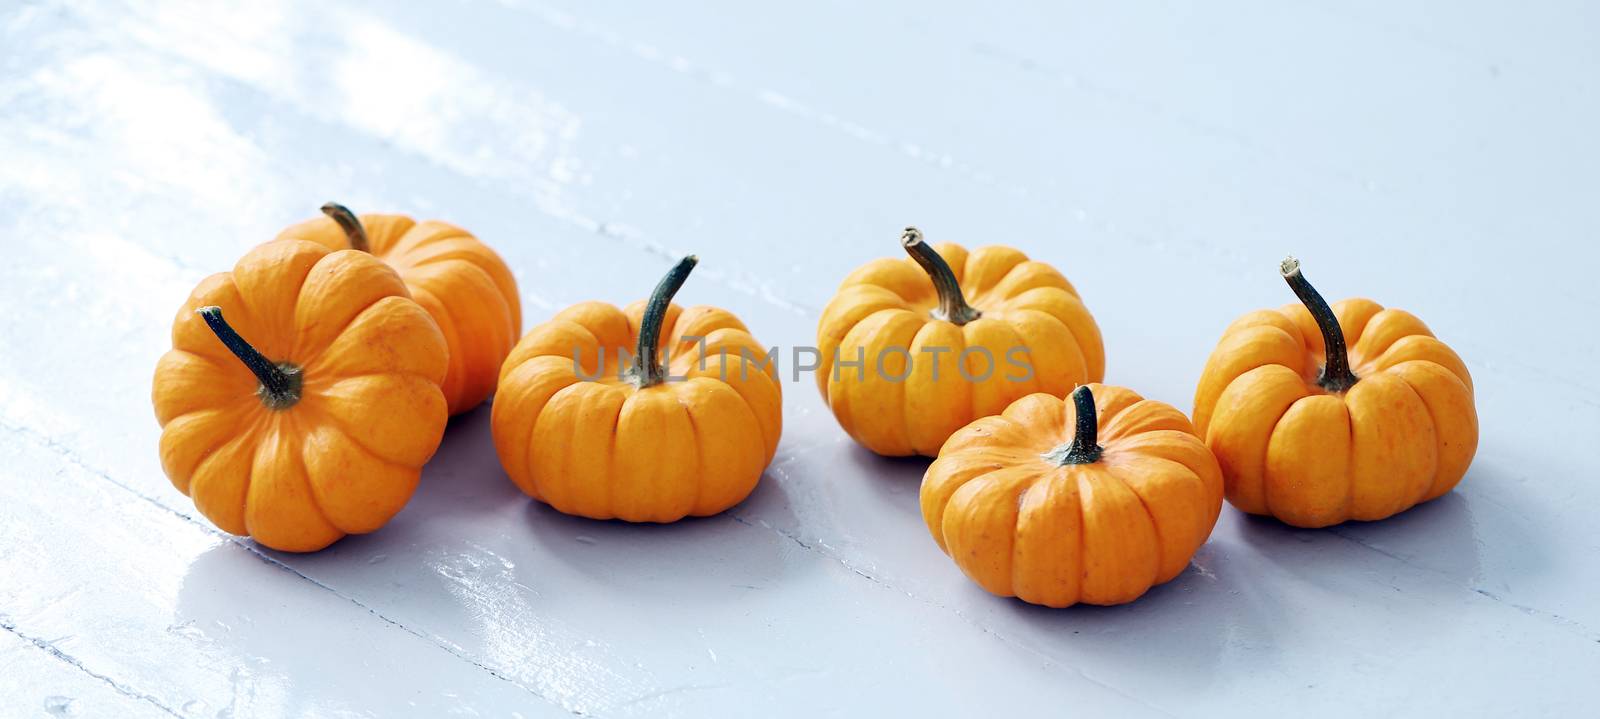 Lots of small pumpkins on a white surface